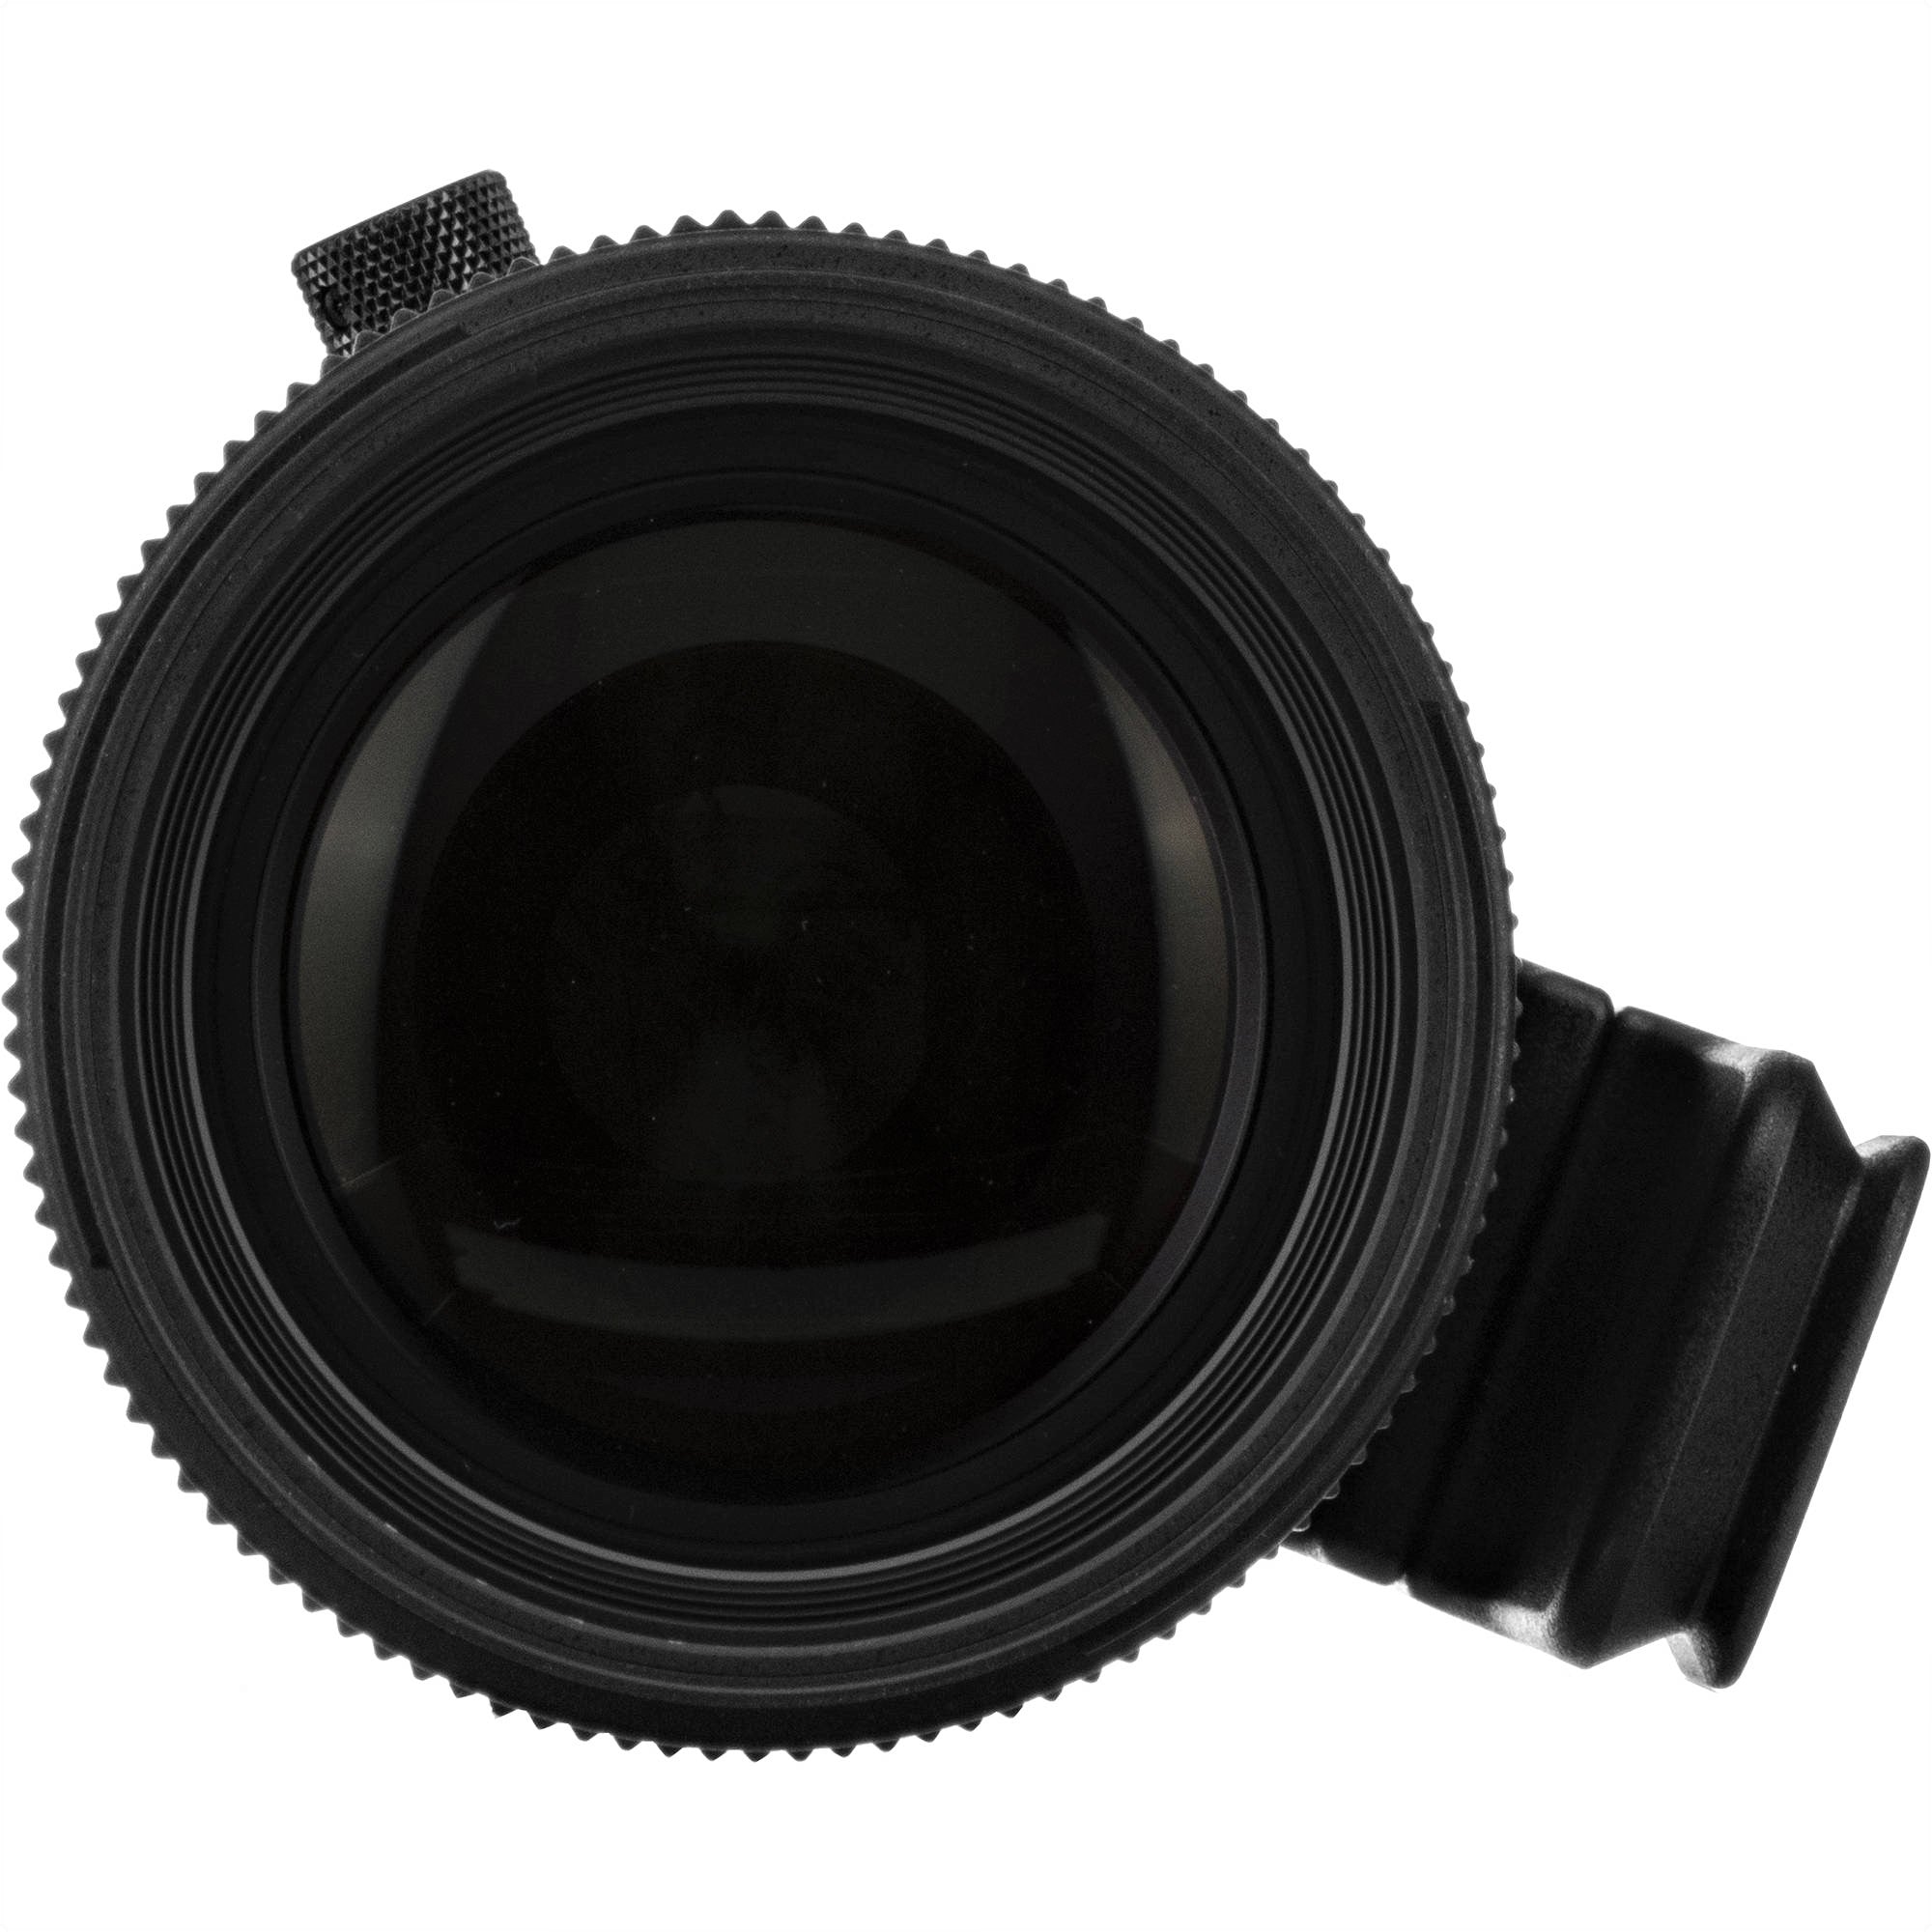 Sigma 70-200mm F2.8 DG OS HSM Sports Lens (Canon EF Mount) in a Front Close-Up View